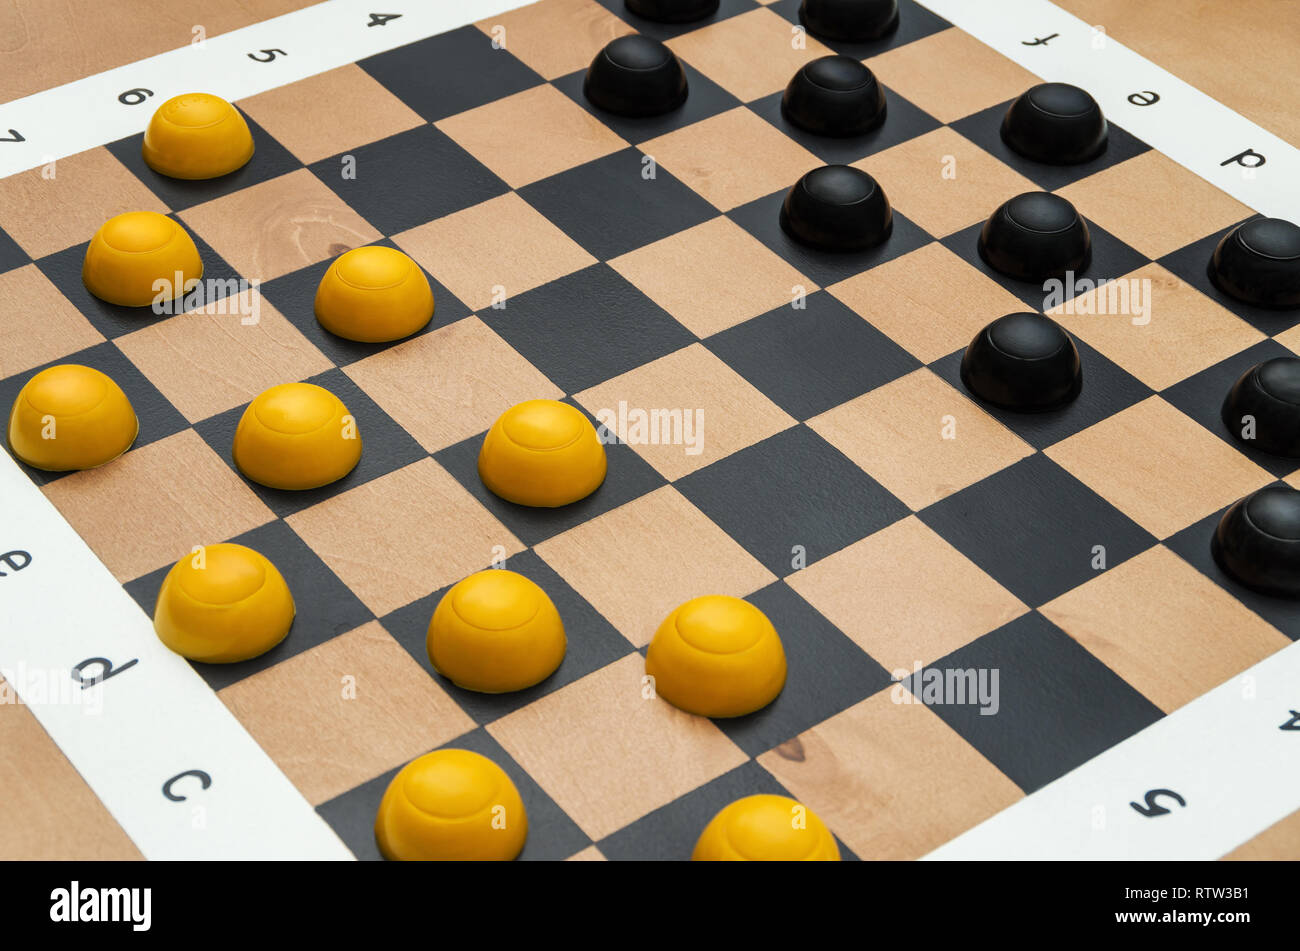 A chessboard with figures in a public park designed for playing chess or checkers Stock Photo